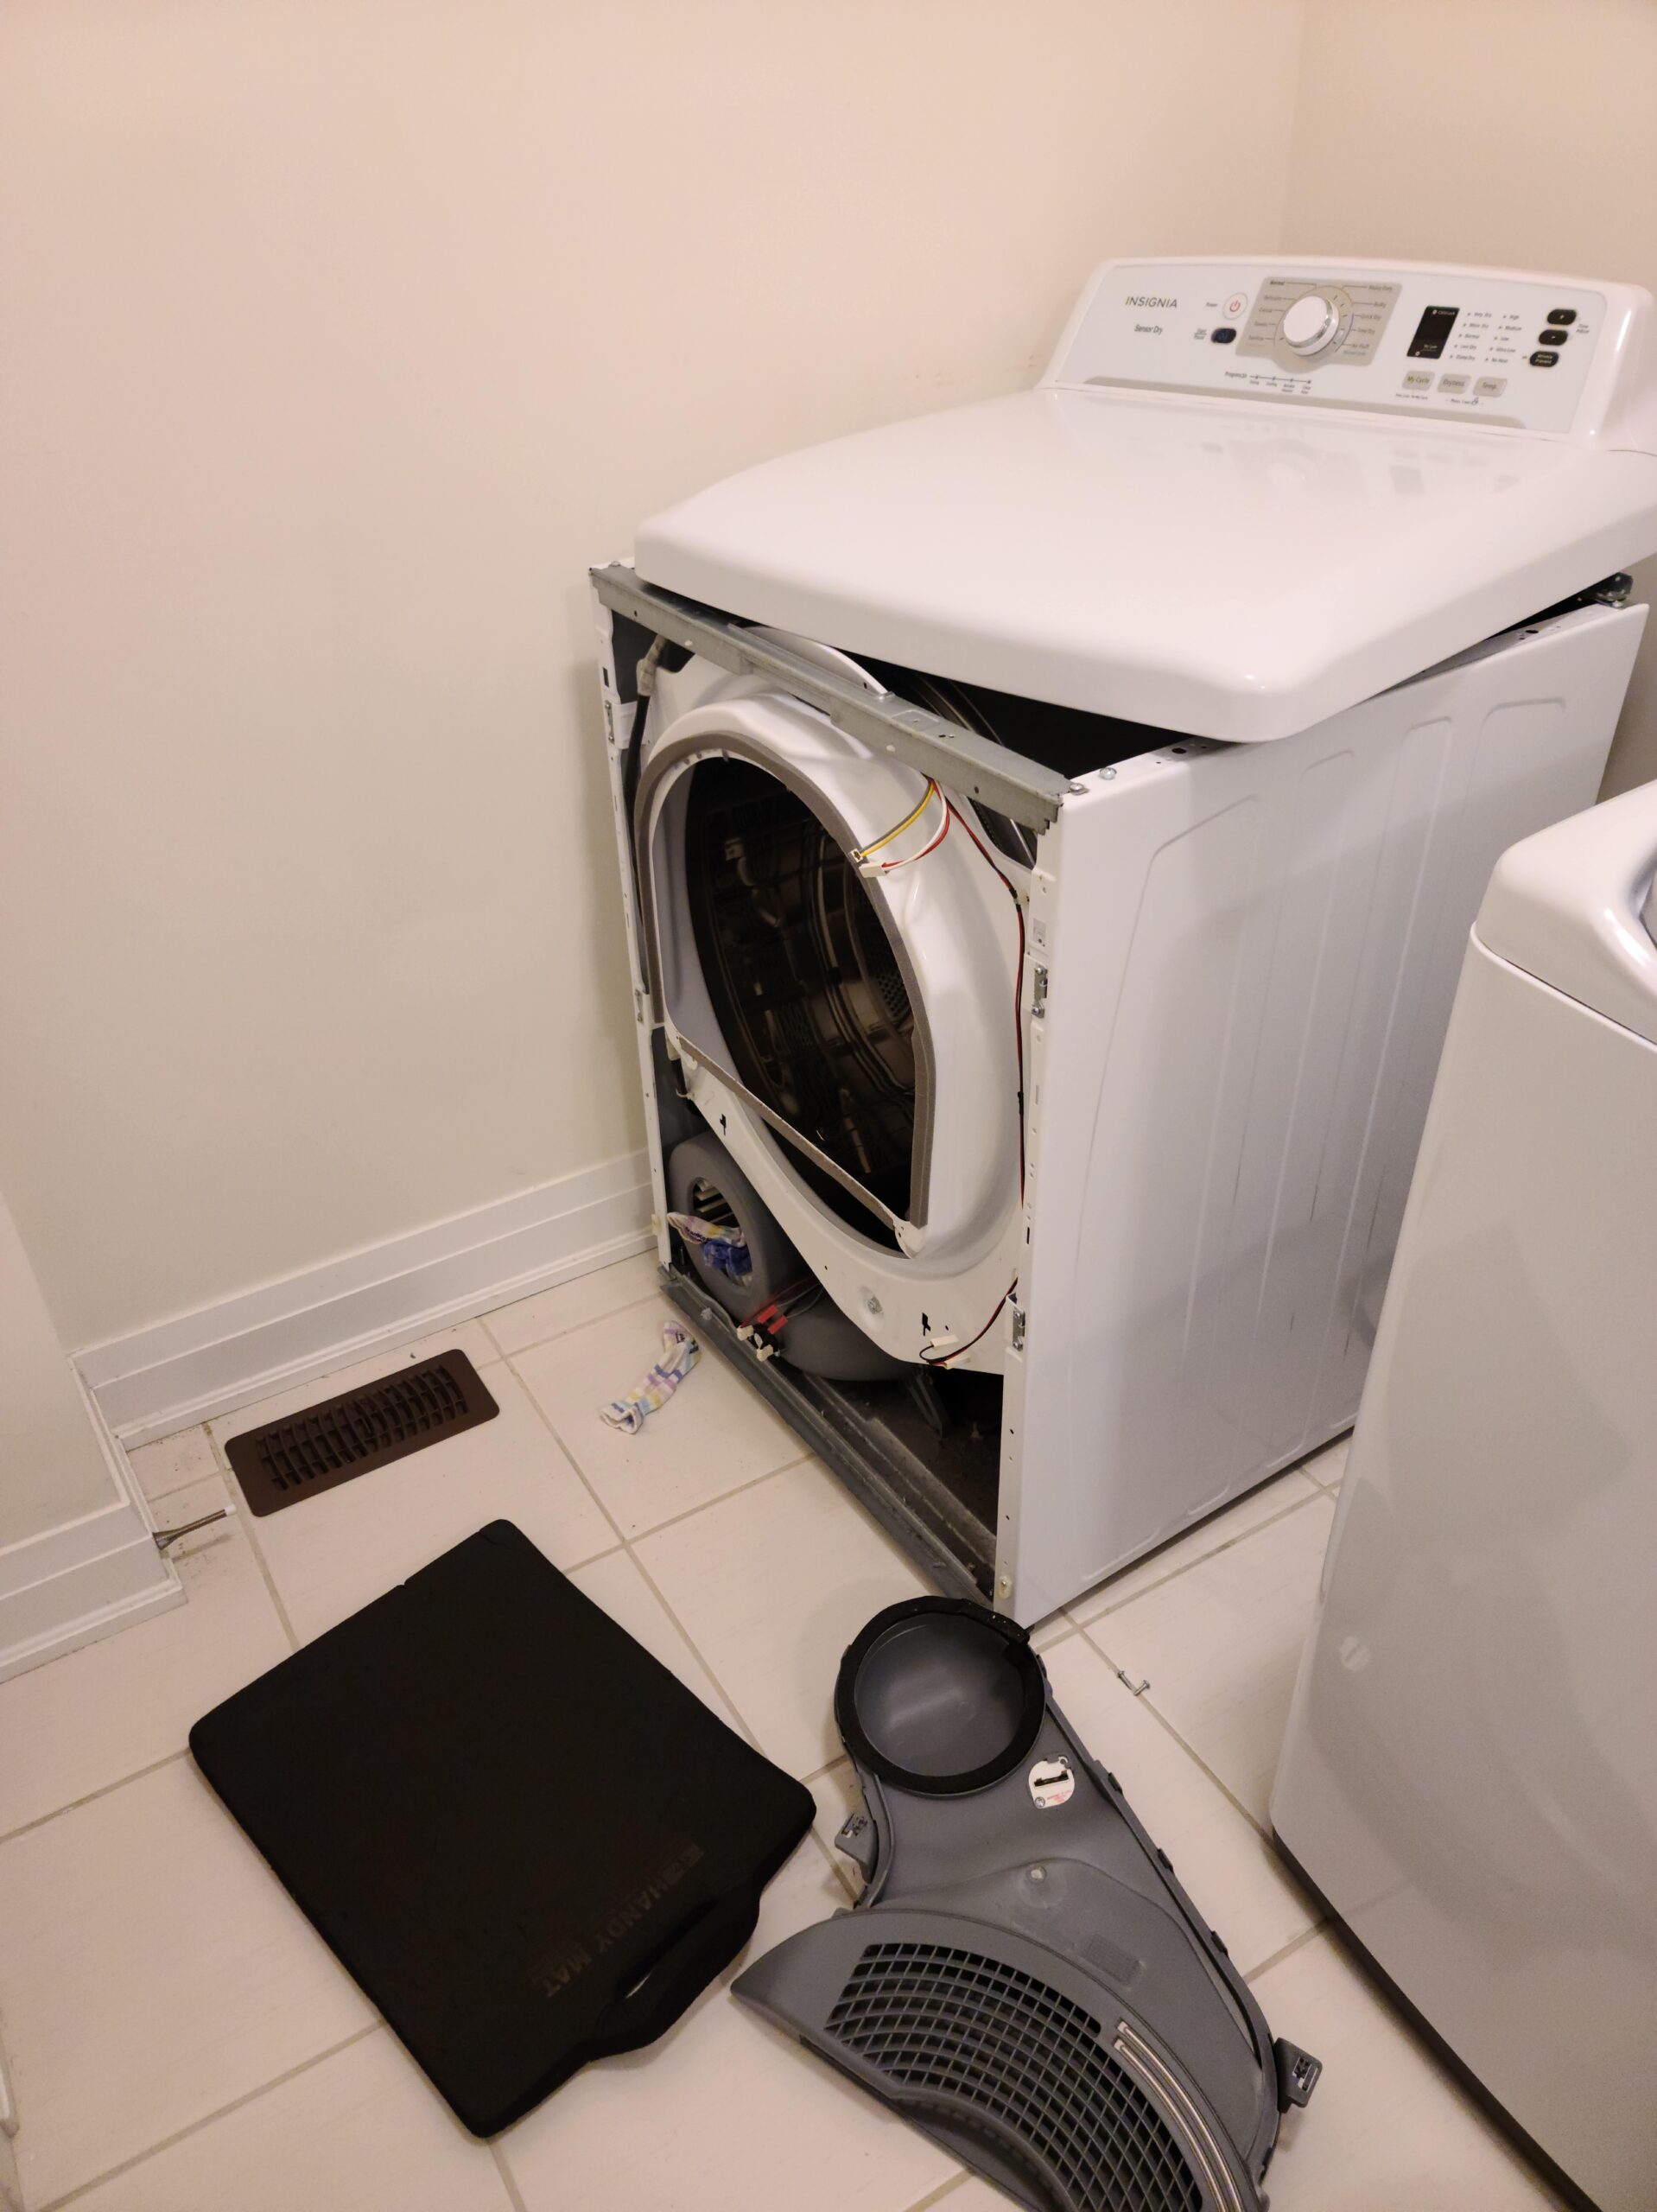 COMMON WASHER PROBLEMS THEIR SOLUTIONS EVERYTHING YOU NEED TO KNOW